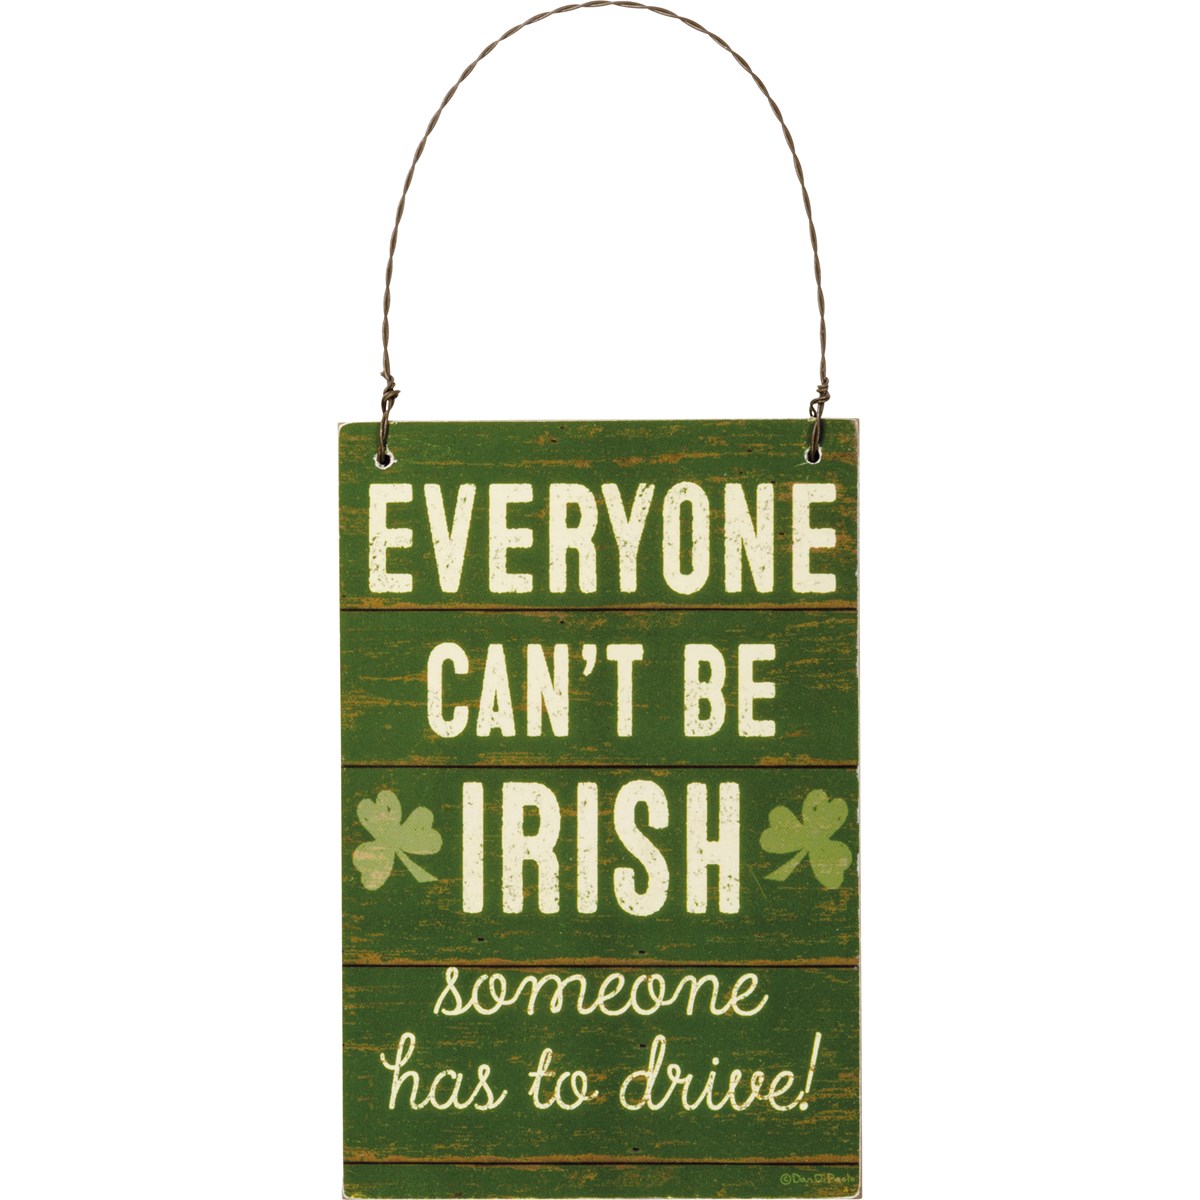 Ornament - Everyone Can't Be Irish - 4" x 6" x 0.25" - Wood, Paper, Wire